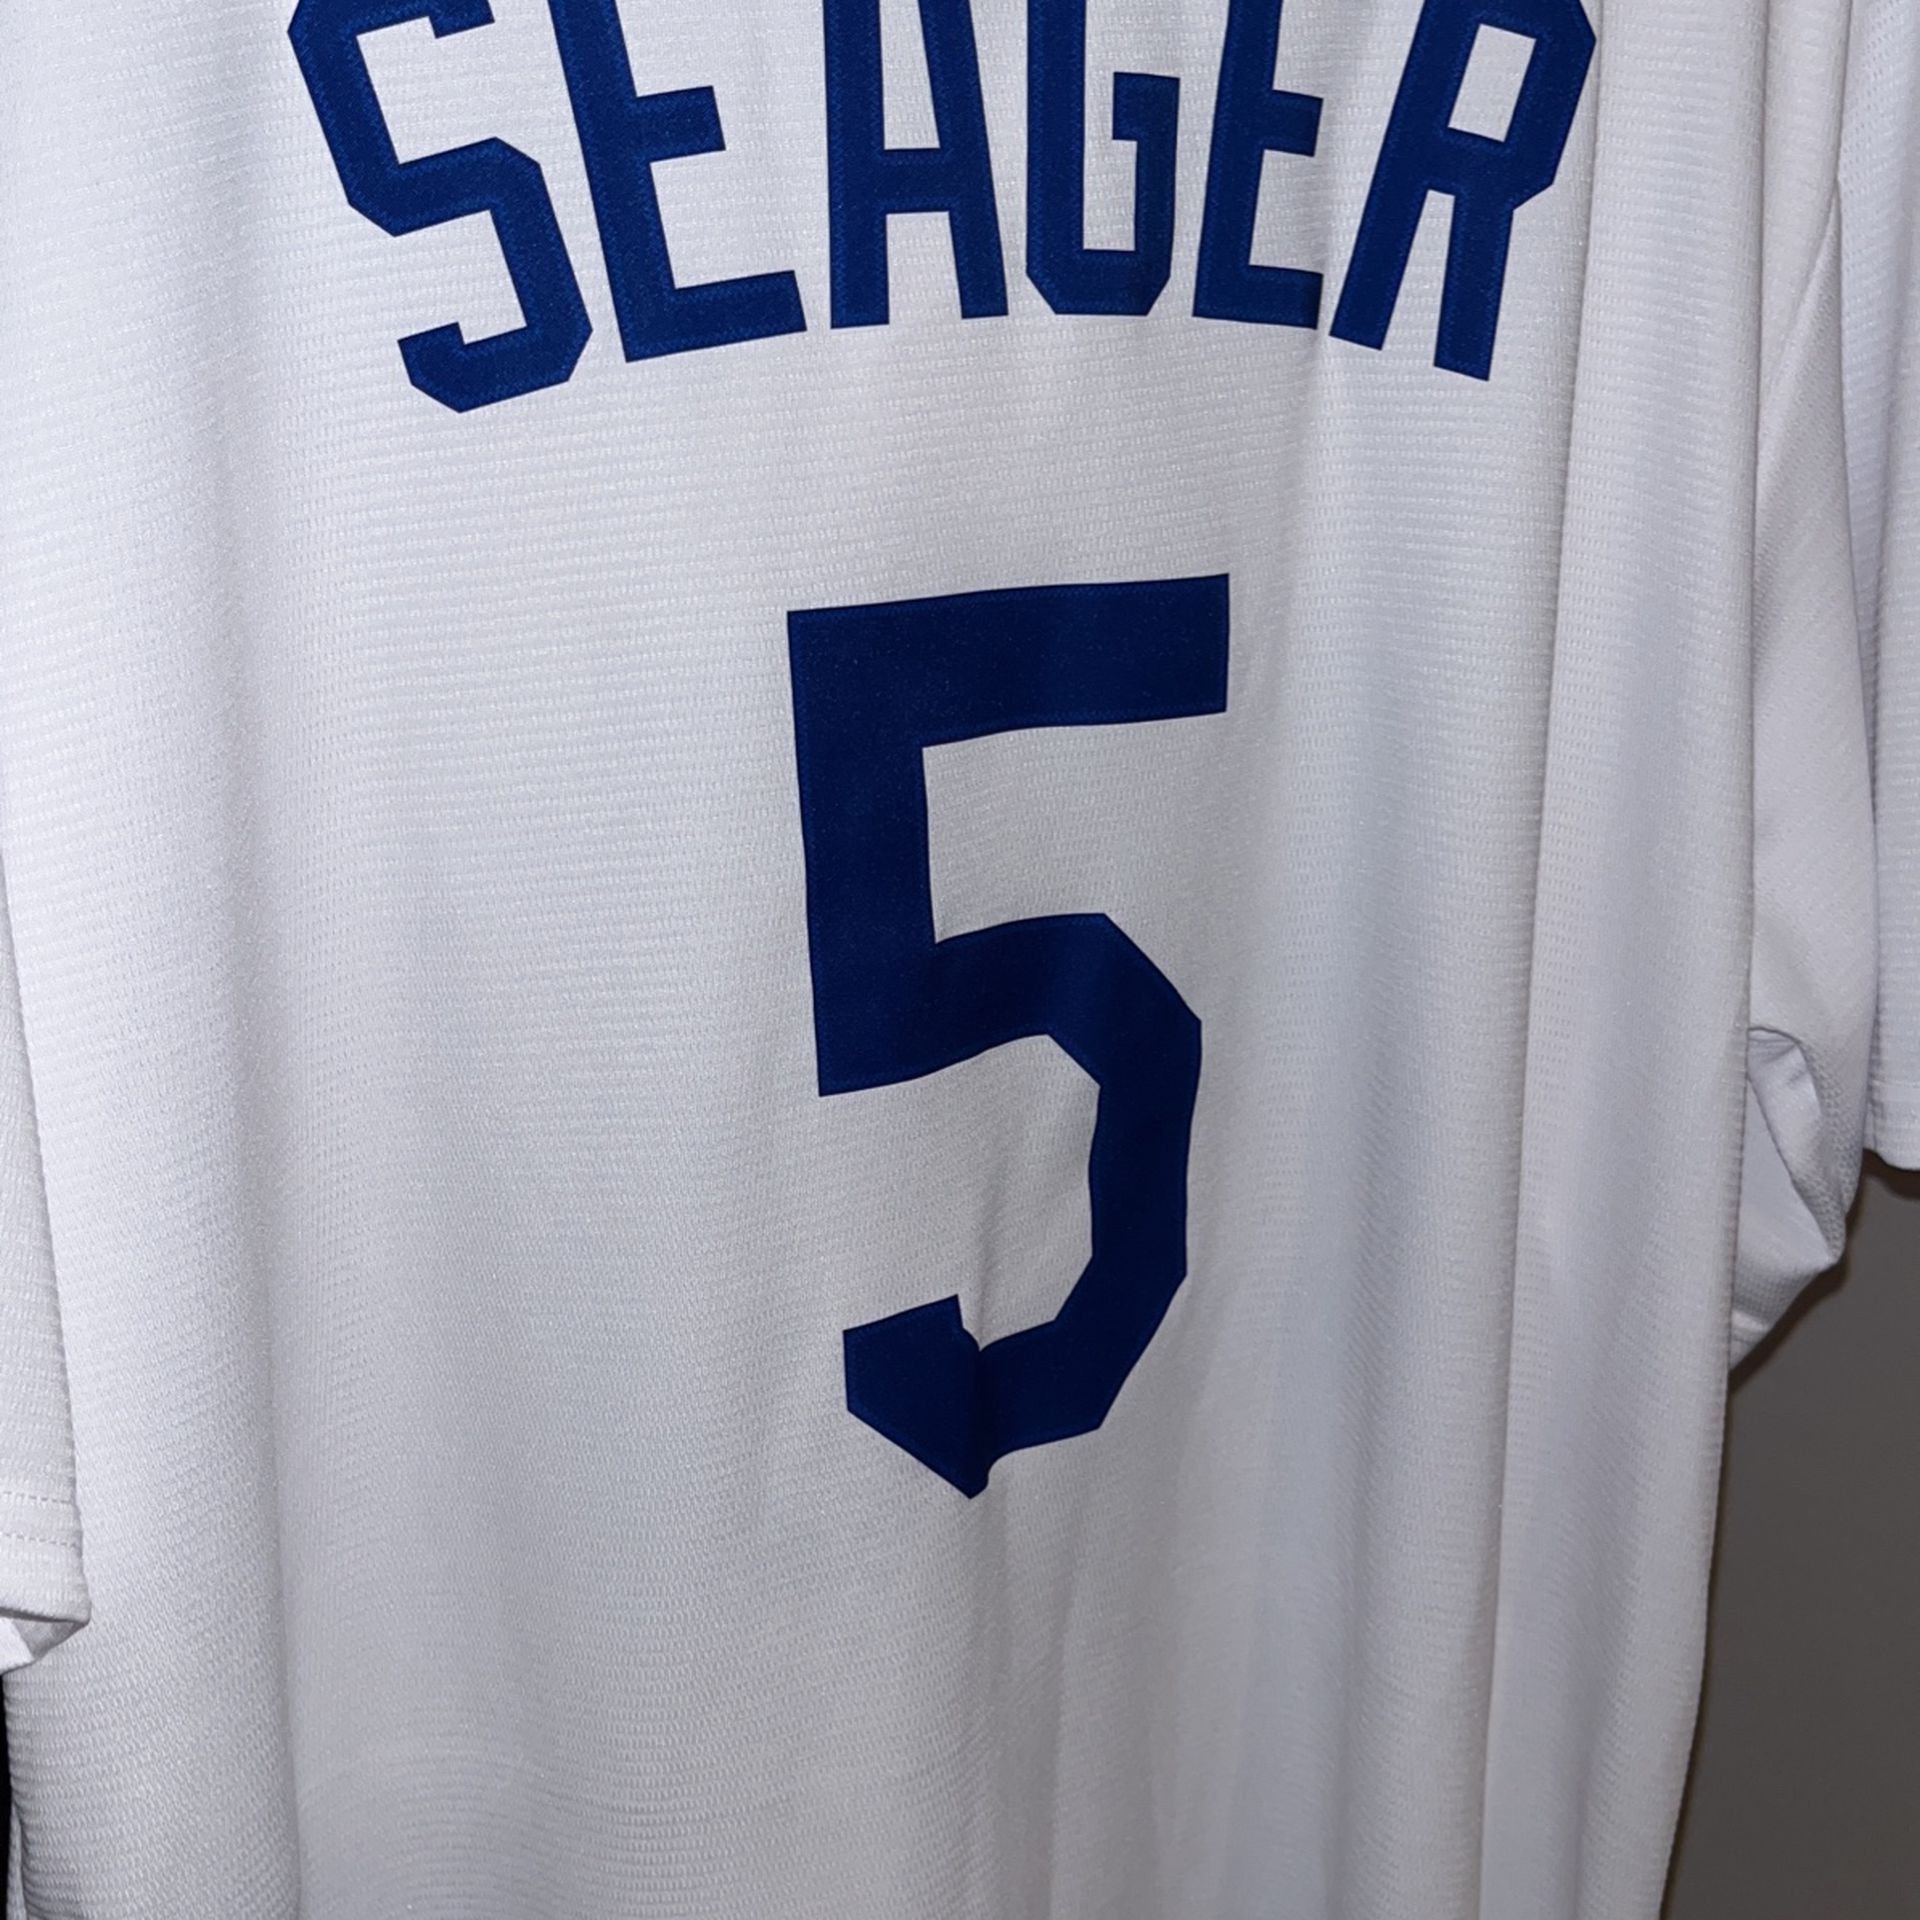 Dodgers Corey Seager Jersey for Sale in Surprise, AZ - OfferUp